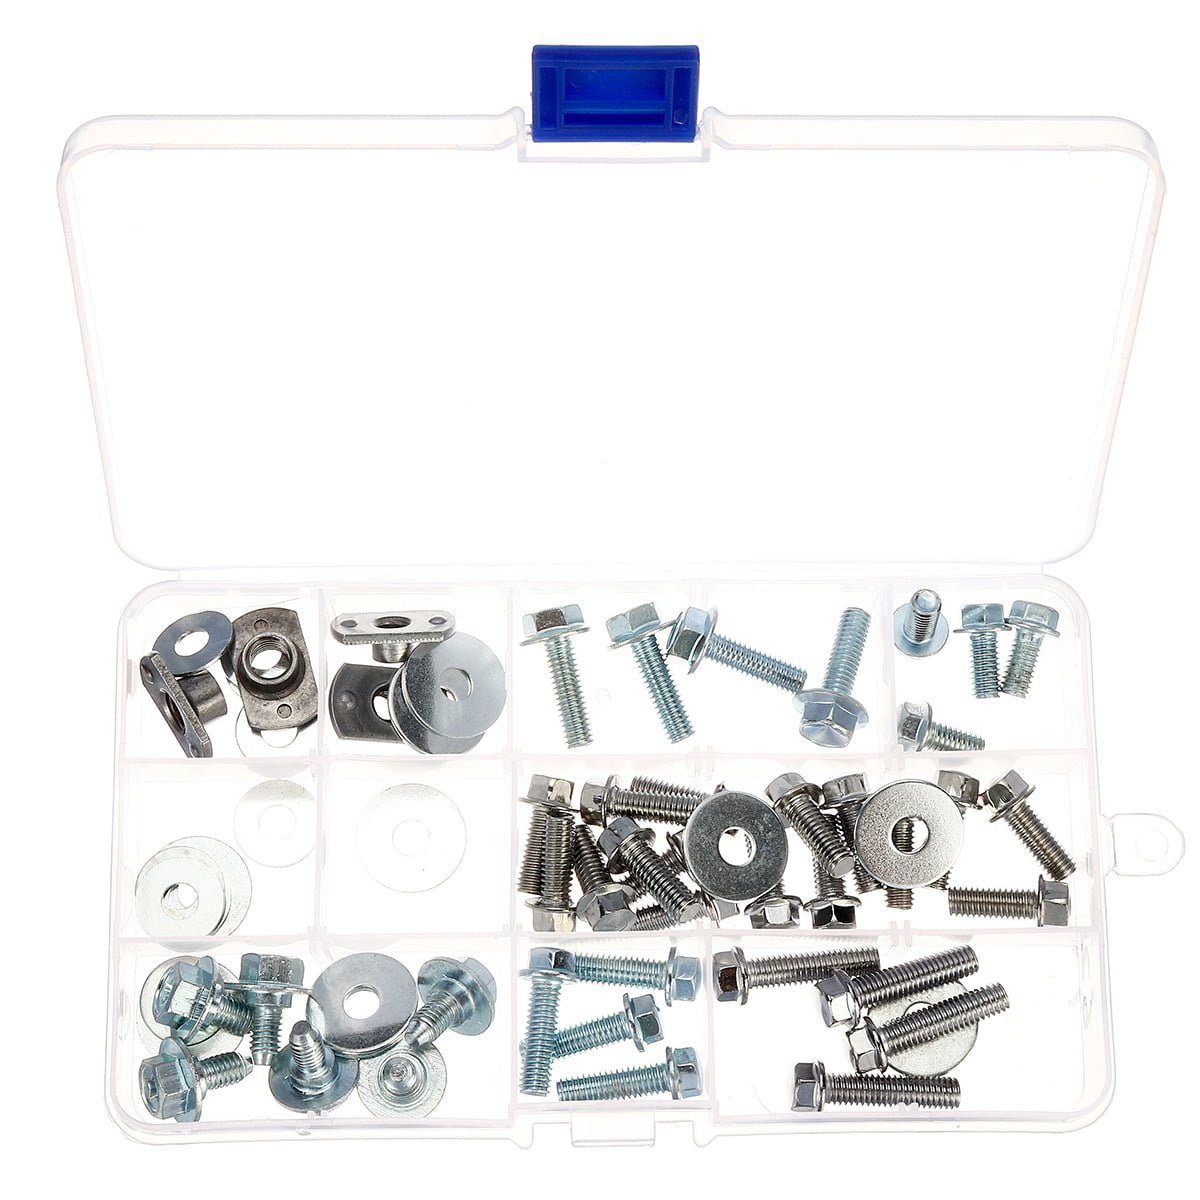 Assorted Box Contains 80 Metric pieces M10 Stainless Steel Flange Bolts and Nuts 